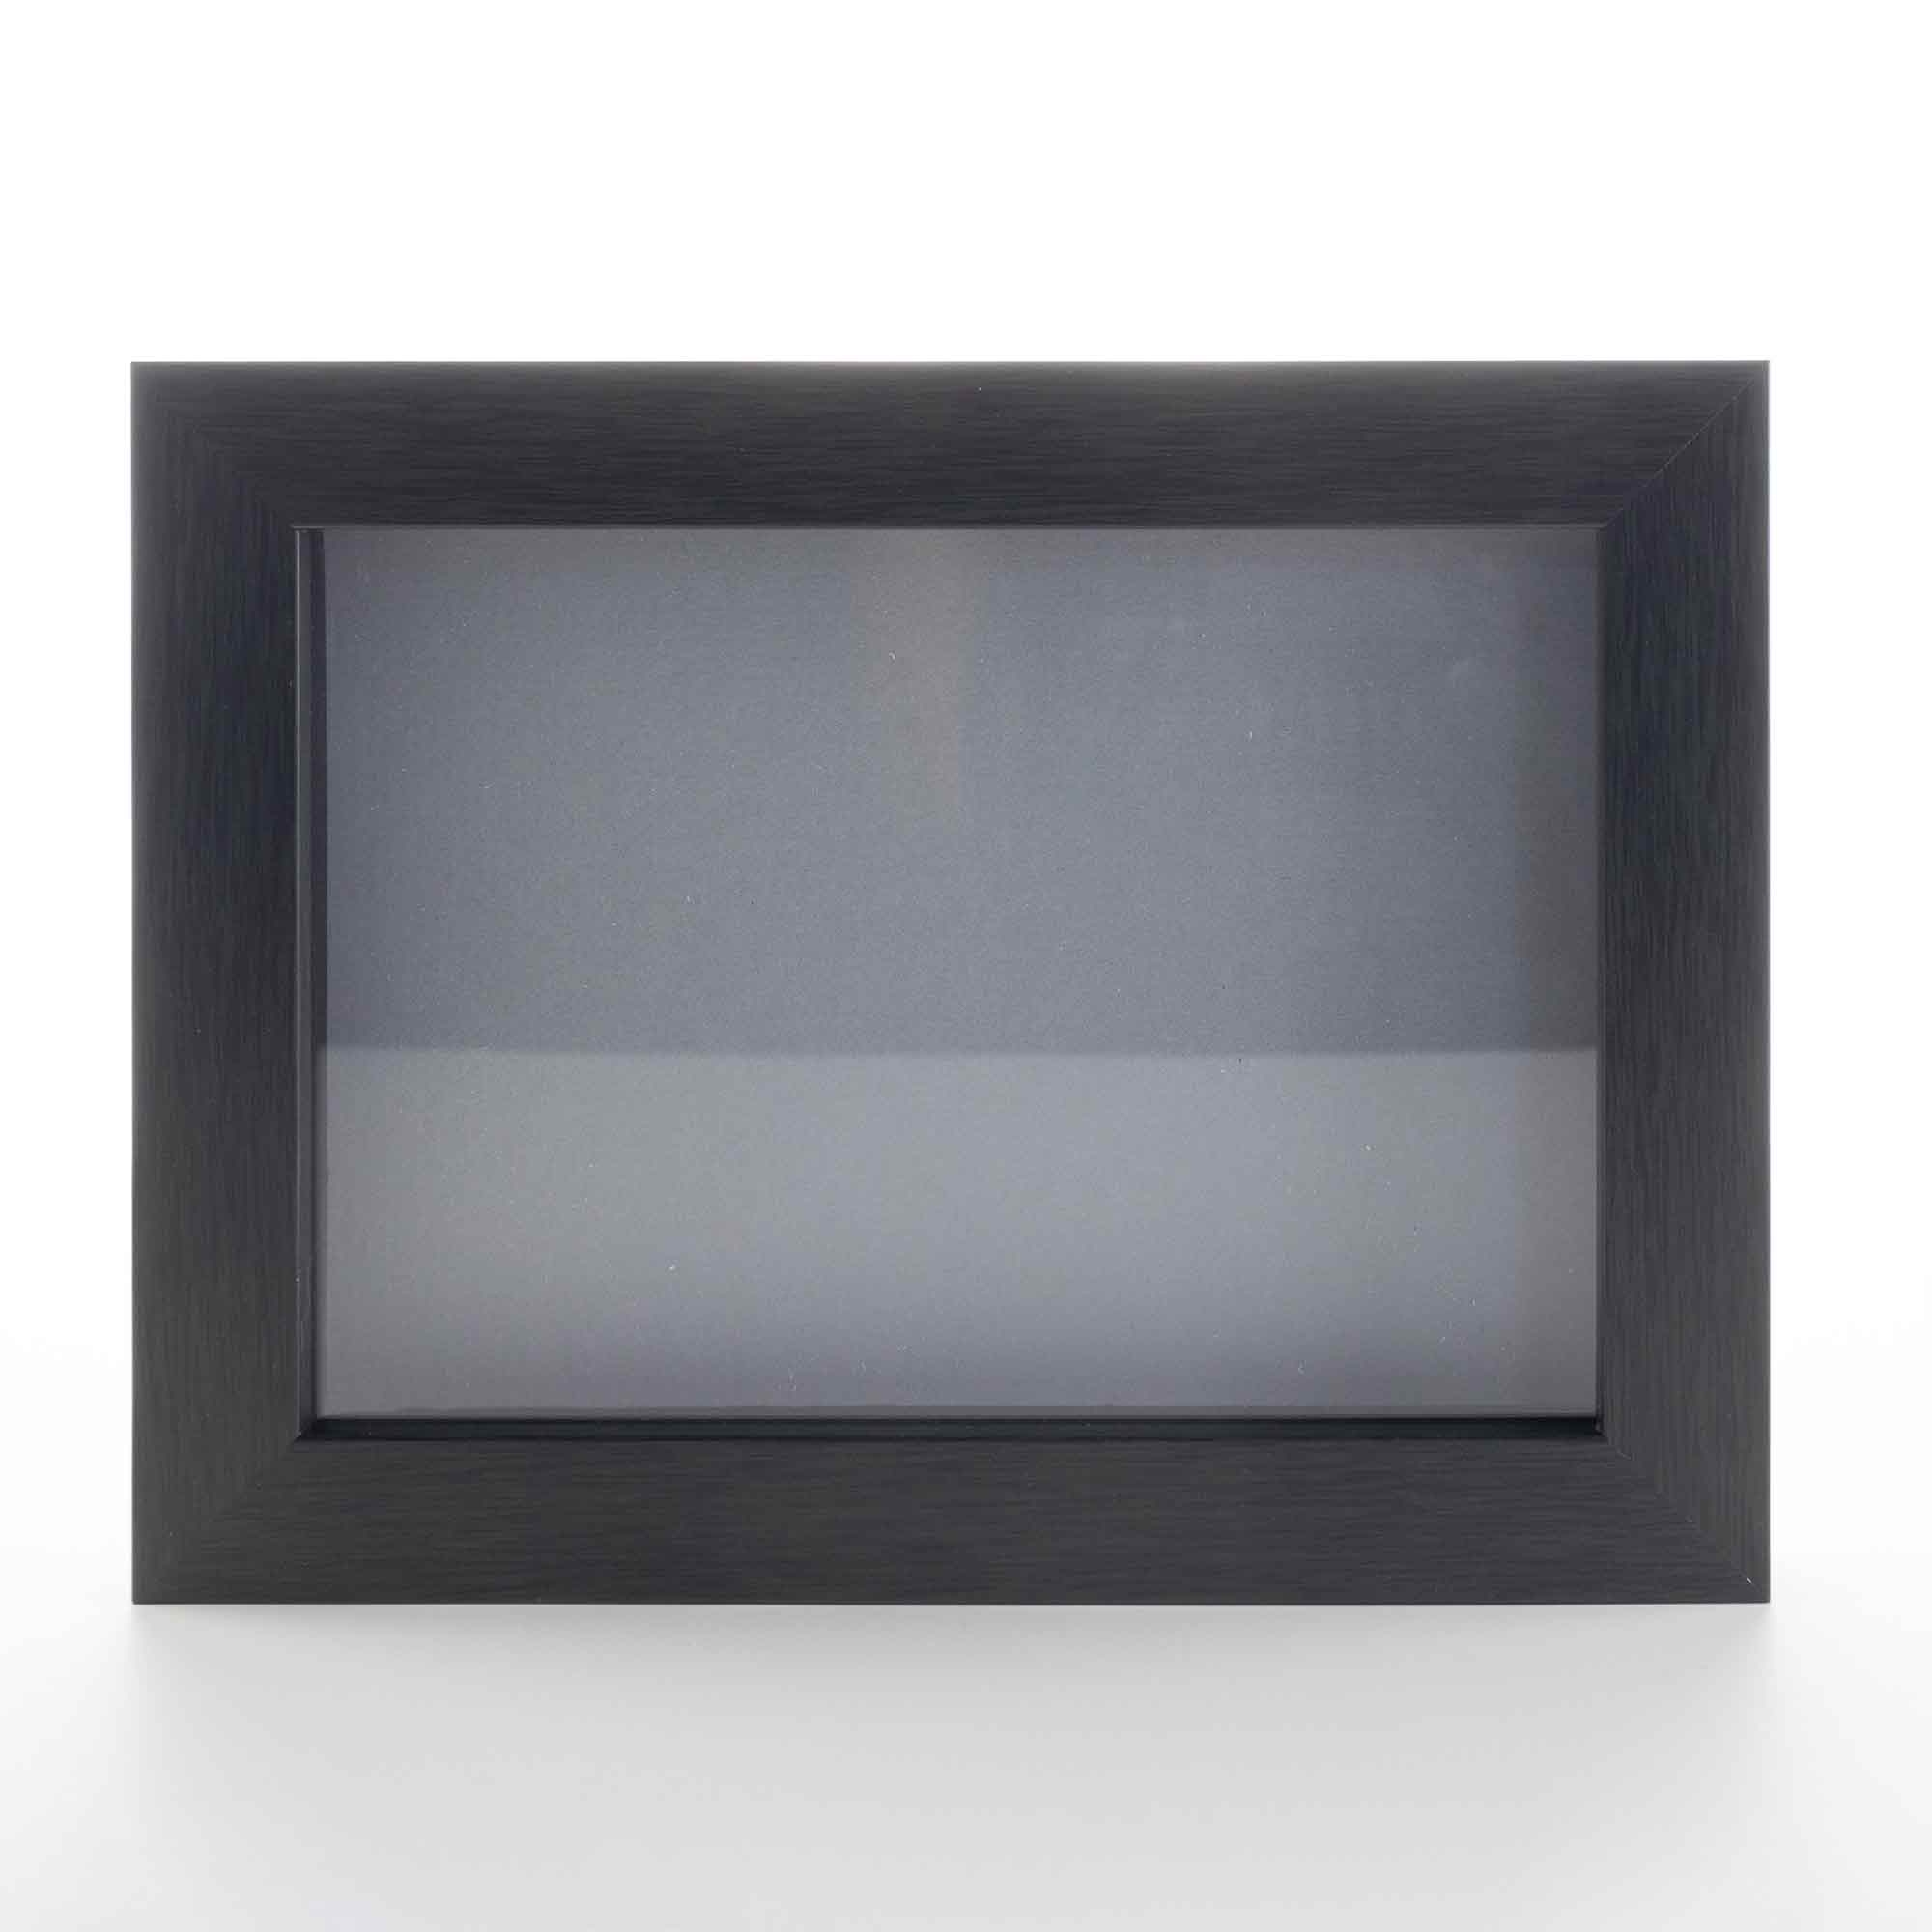 Charcoal 8x8 Wood Shadow Box with Grey Acid-Free Backing - With 5